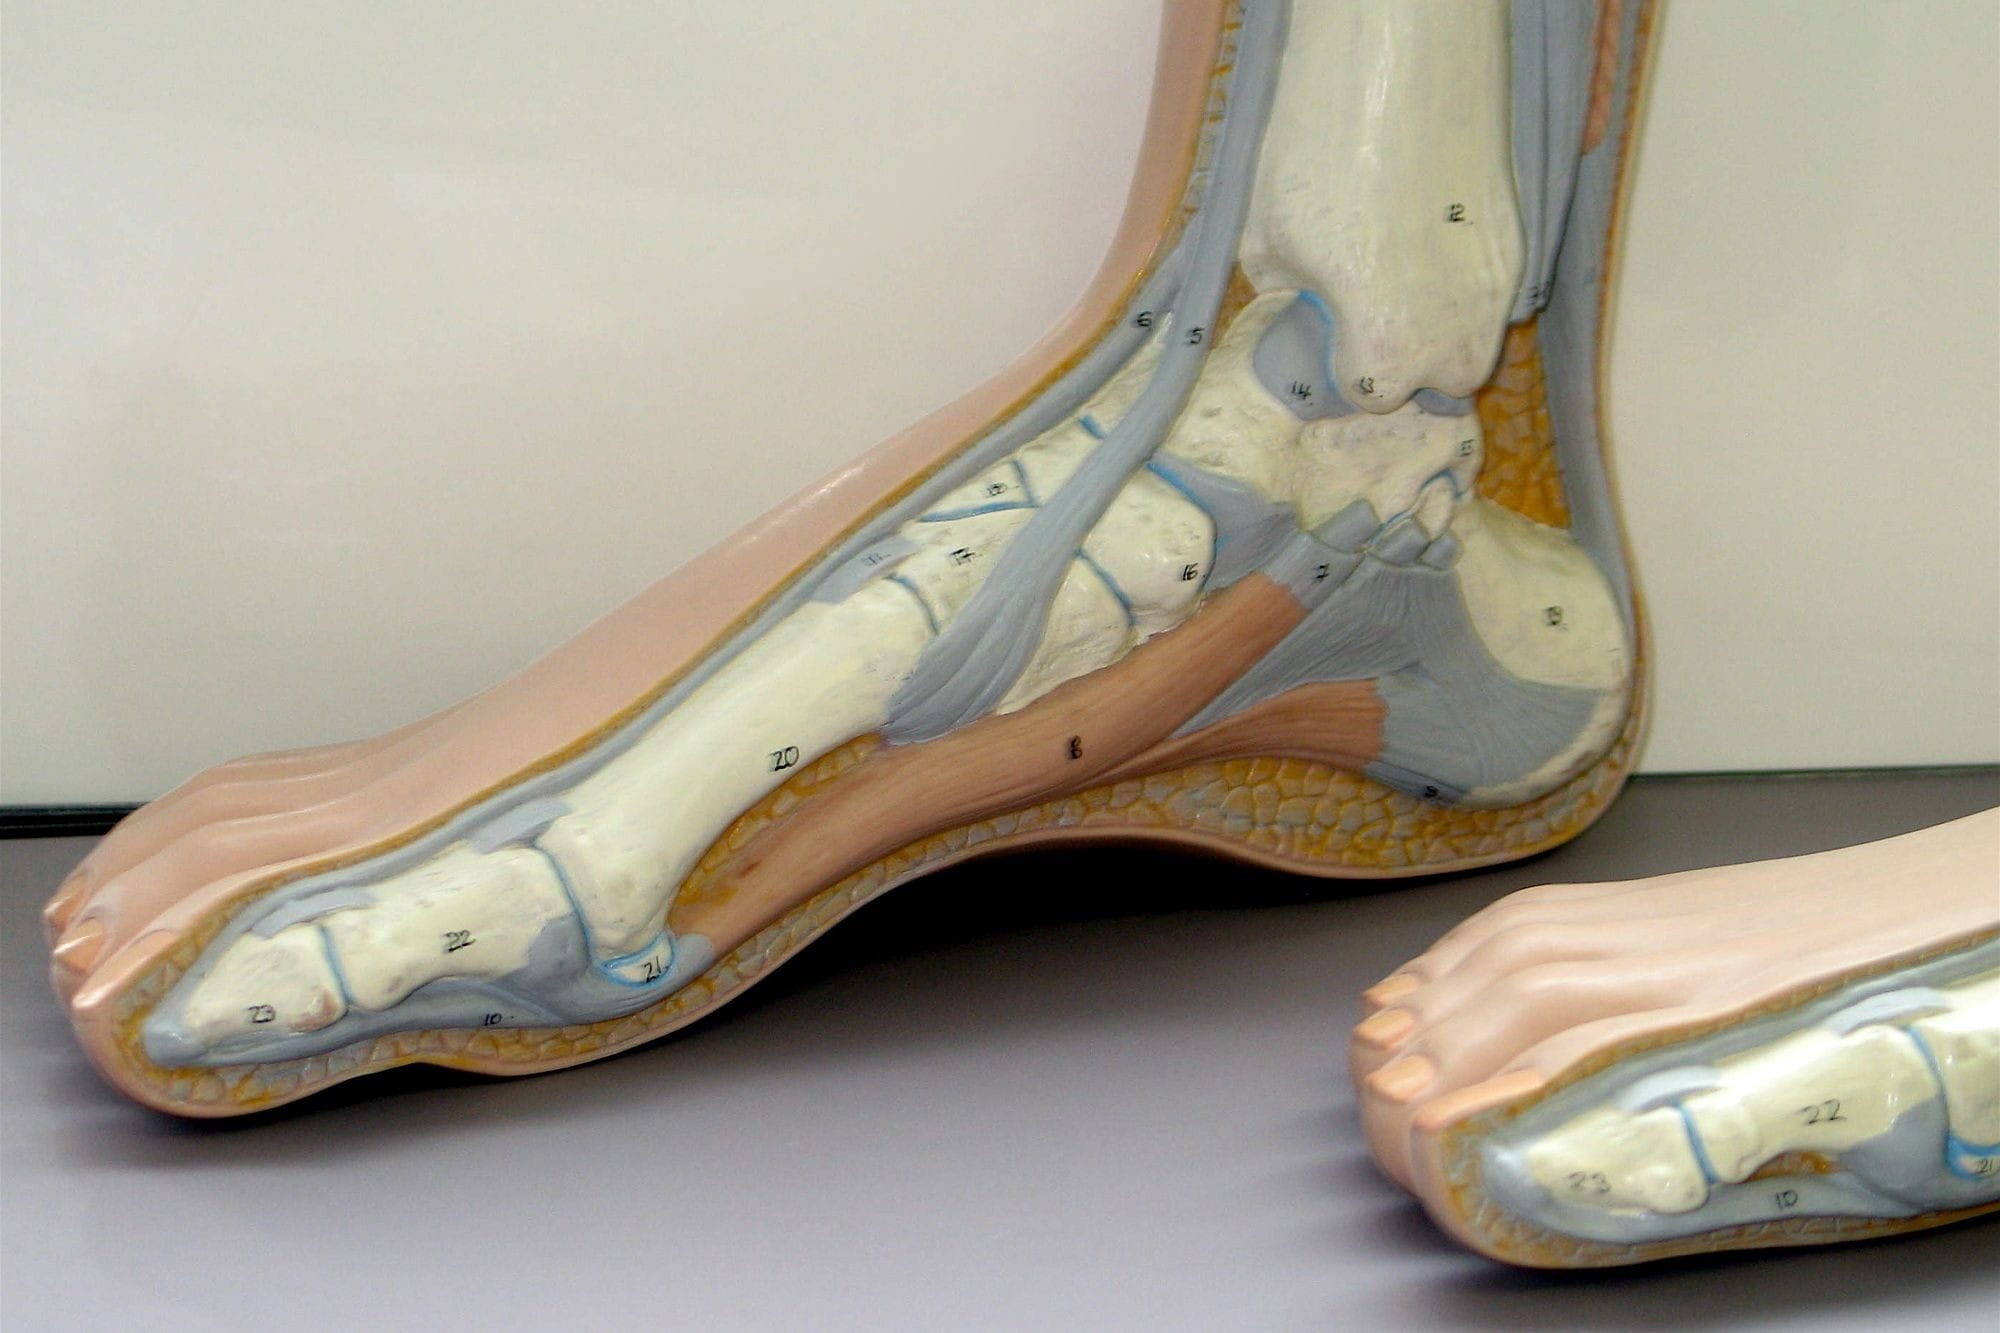 Model of Foot and Ankle